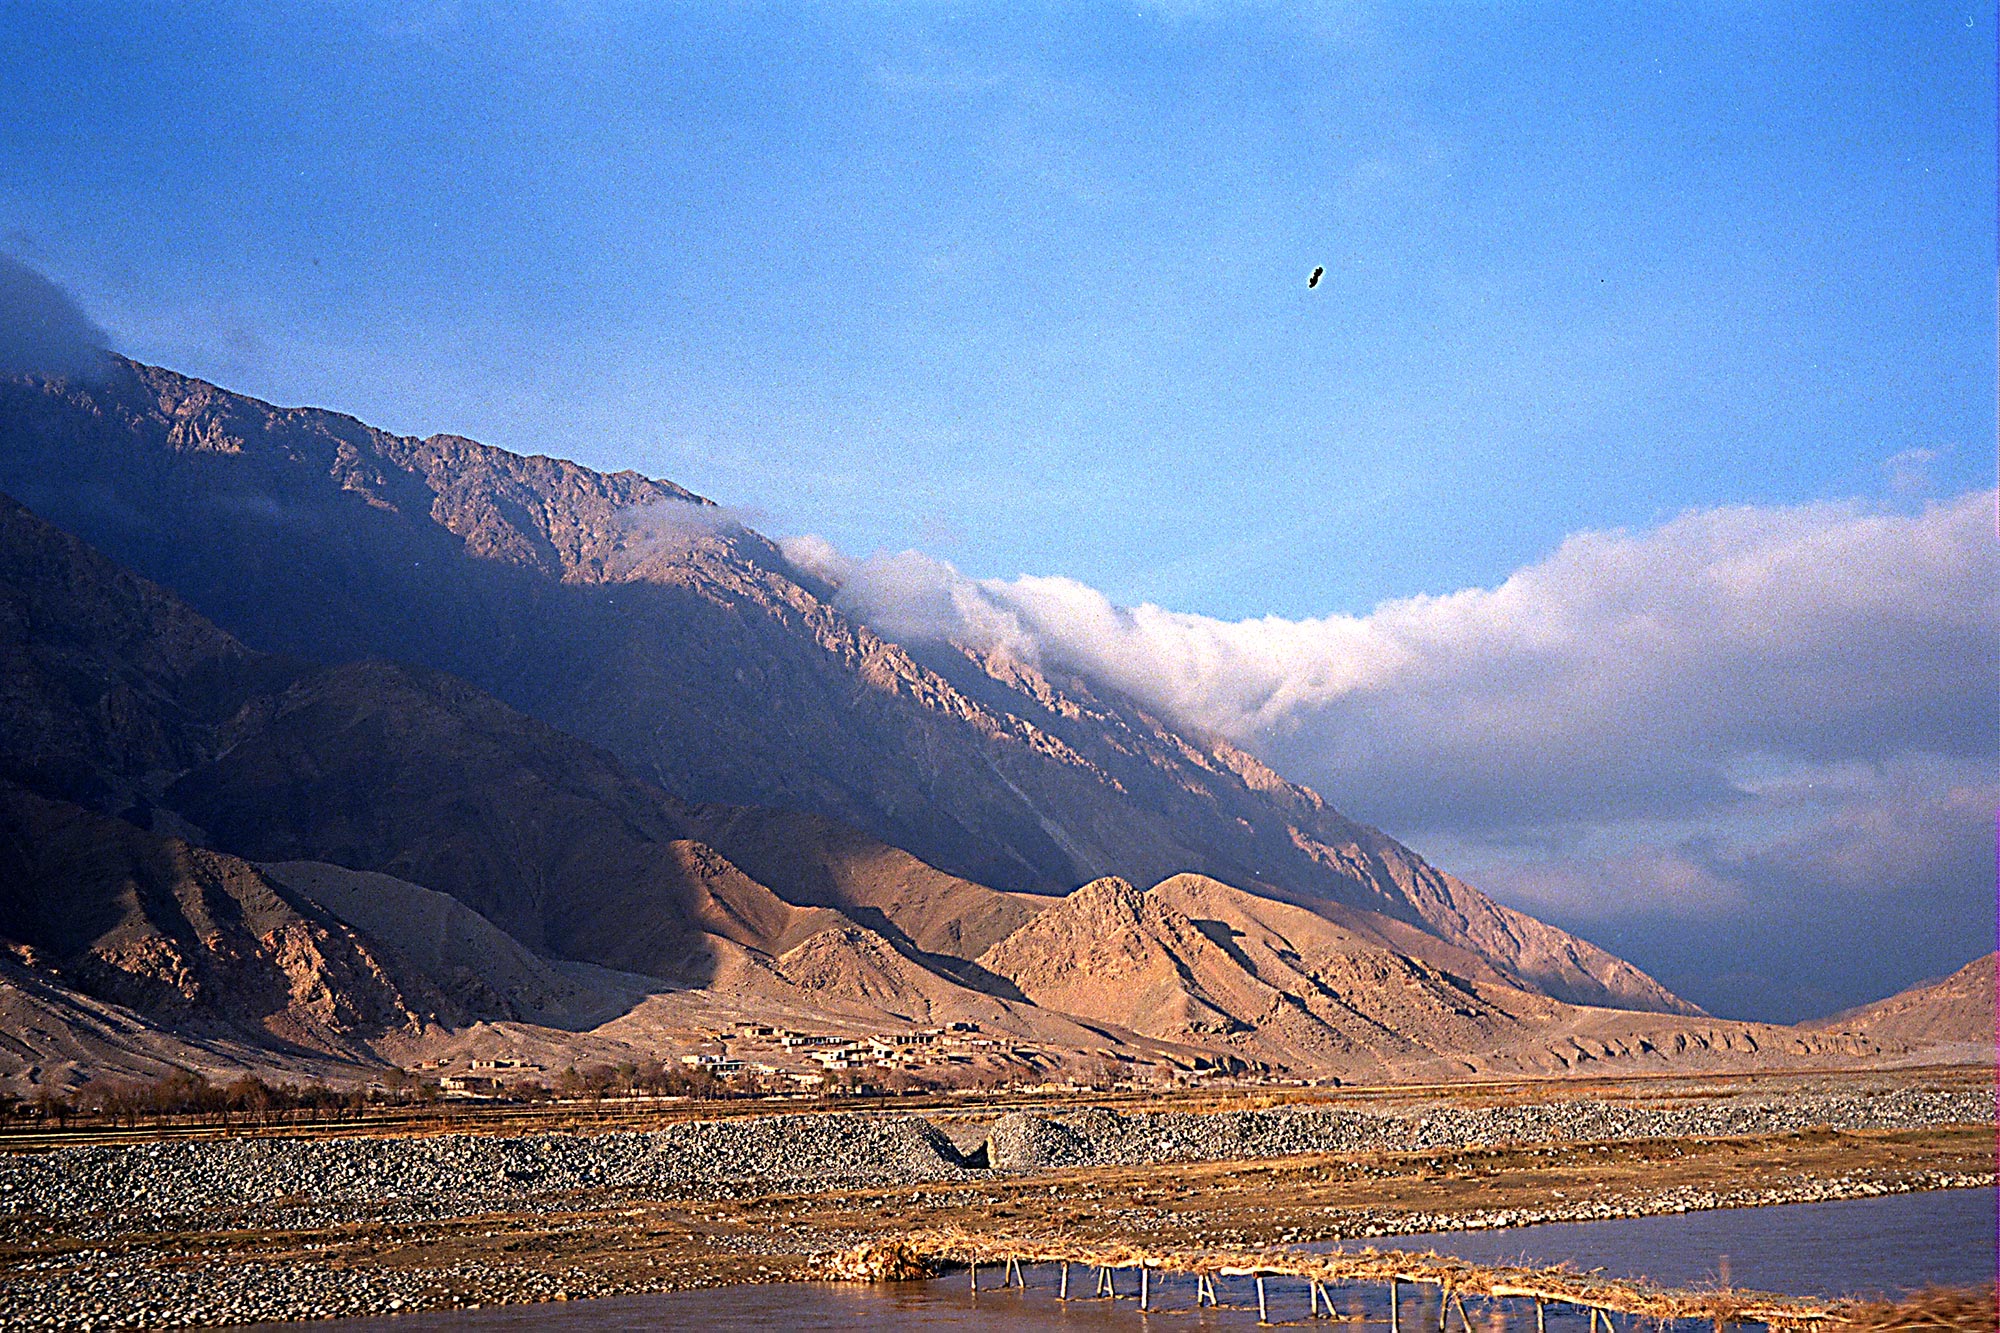 Mountains along the road to Kabul